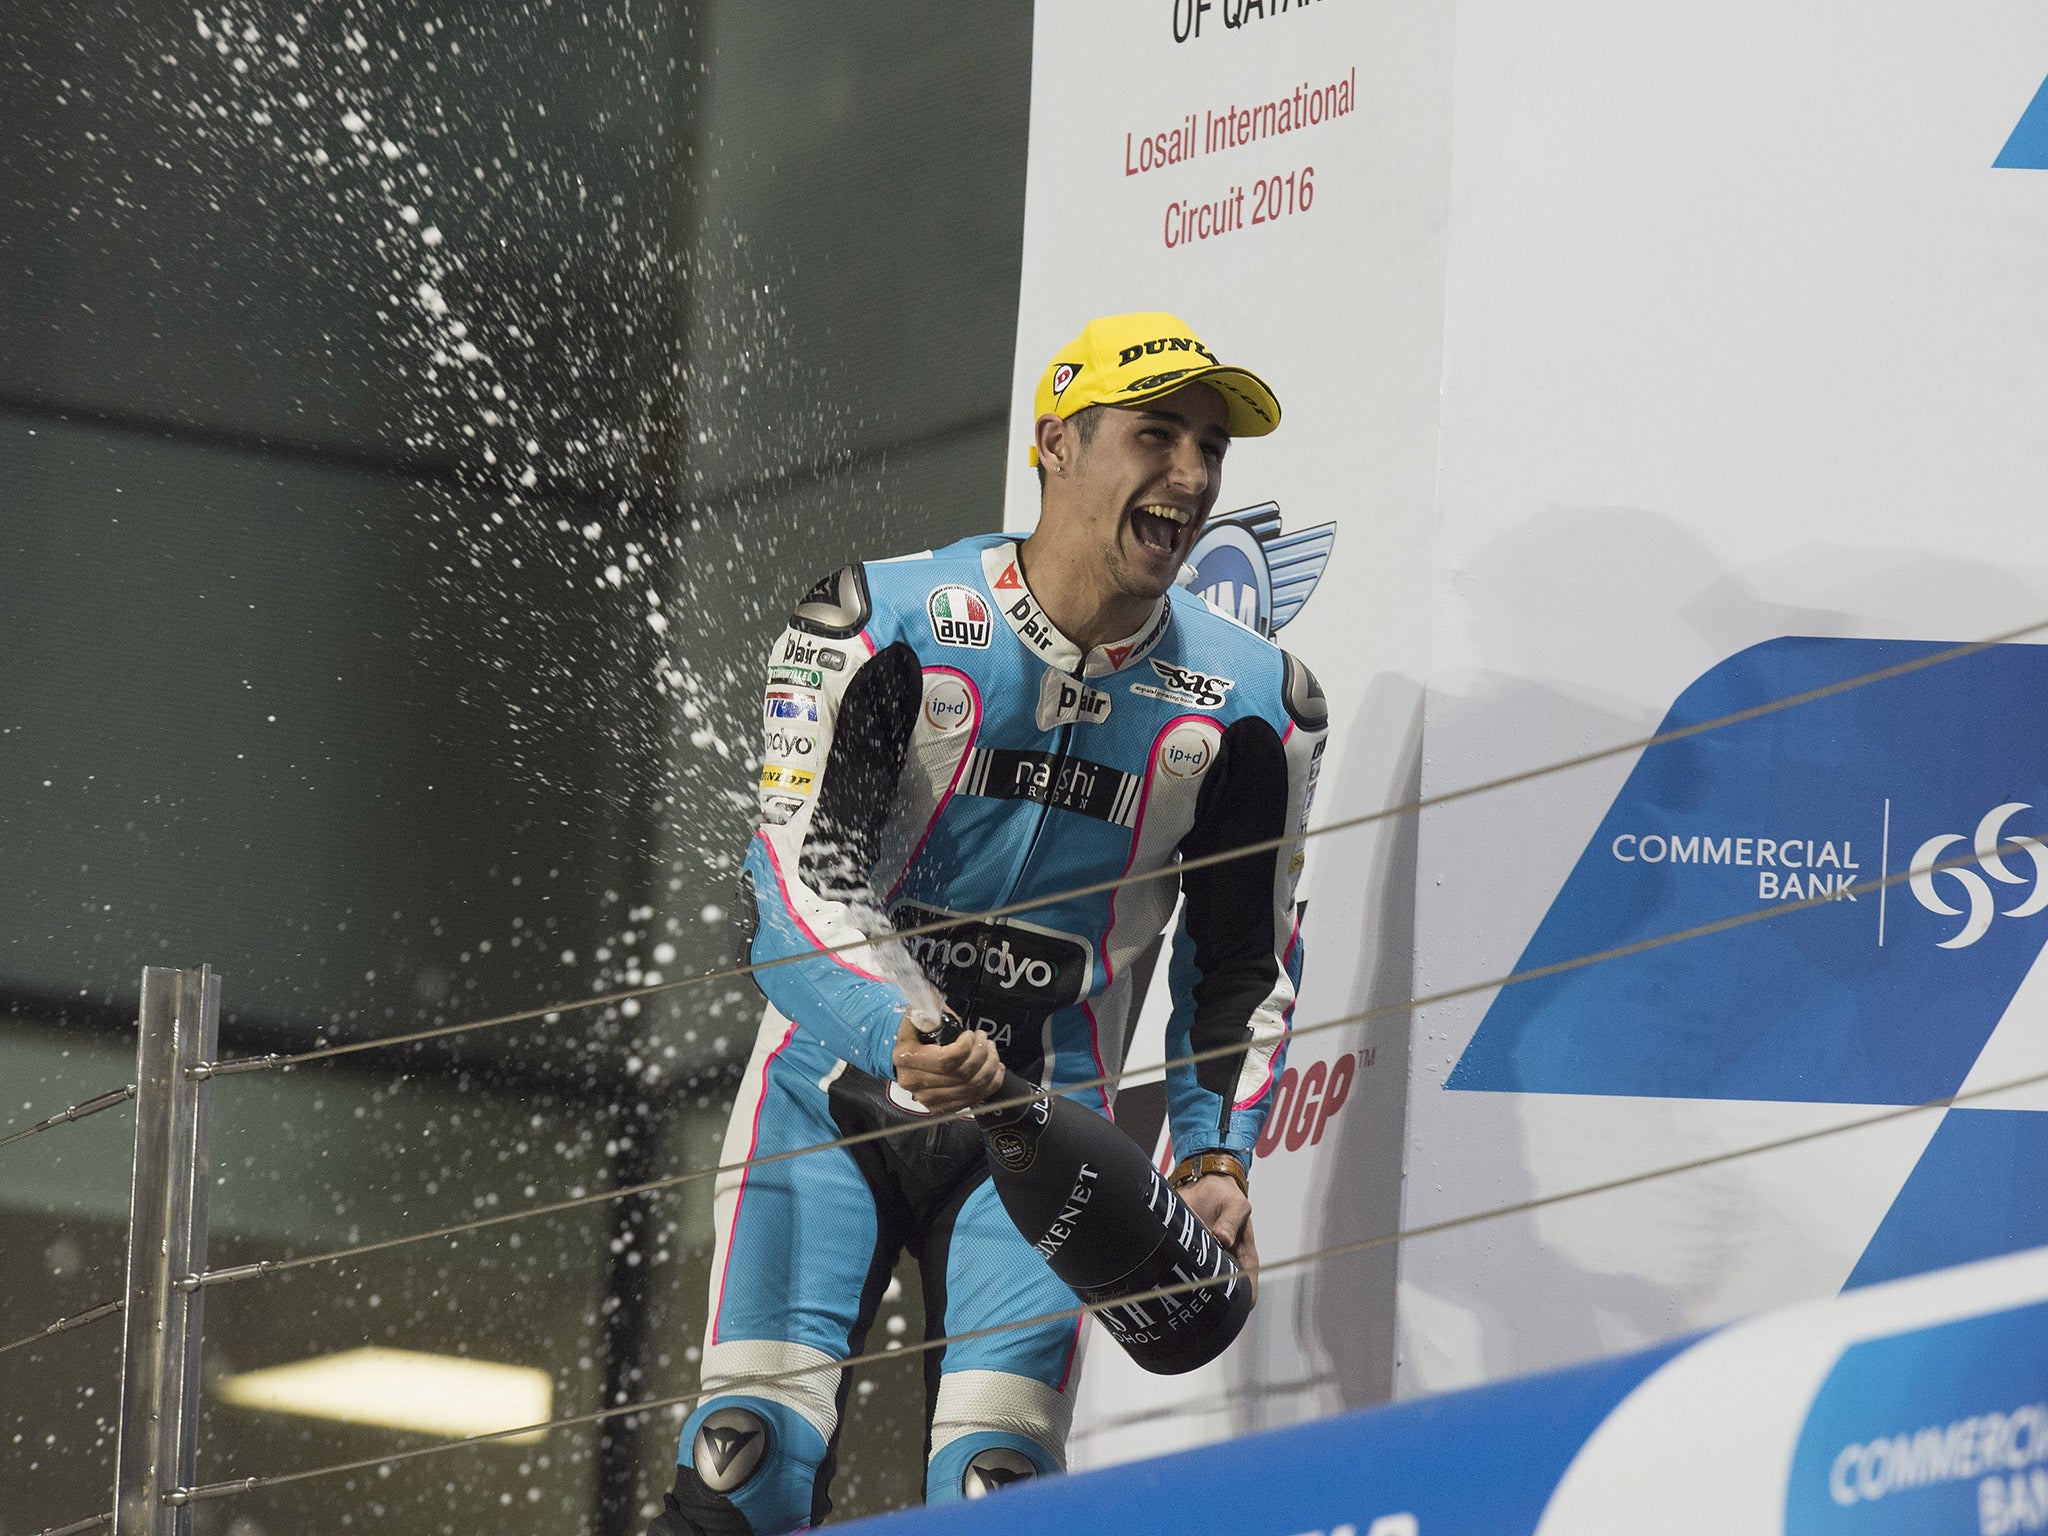 Salom finished second in this season's Qatar Grand Prix